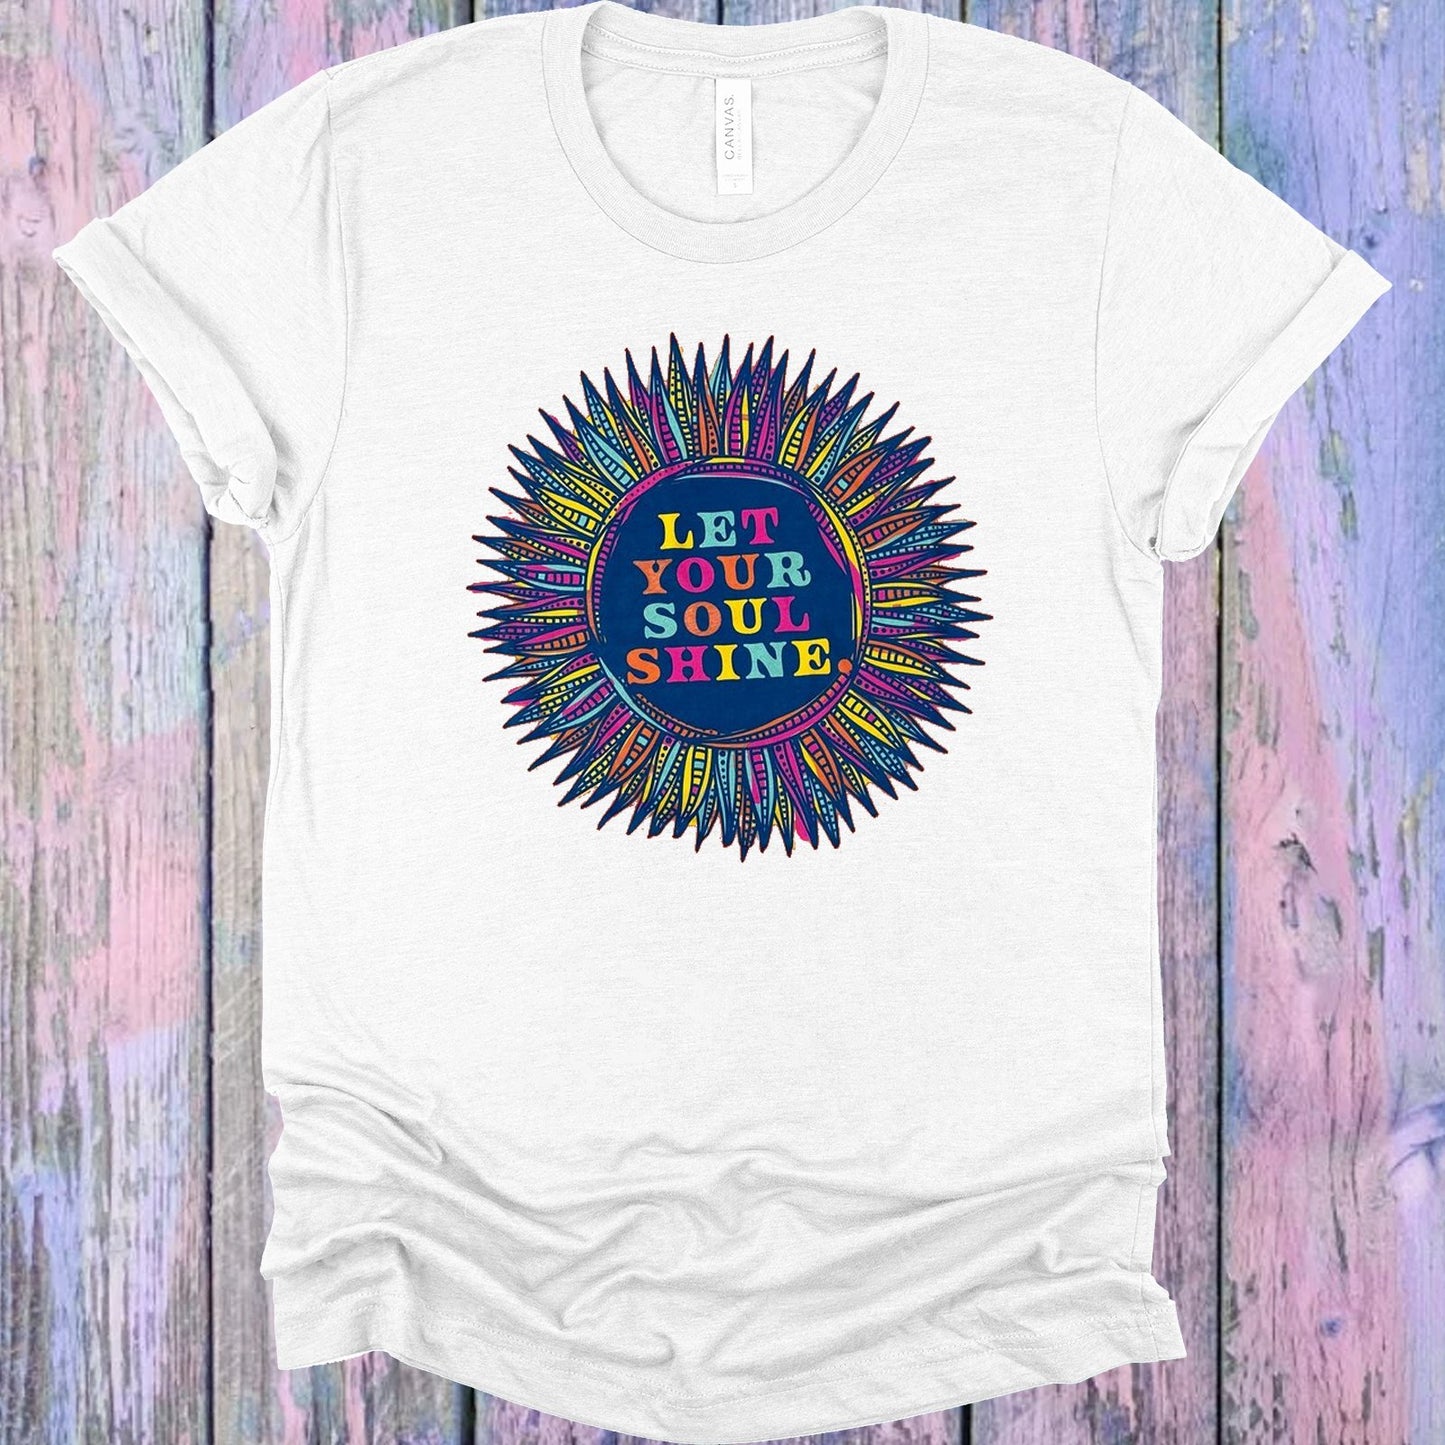 Let Your Soul Shine Graphic Tee Graphic Tee